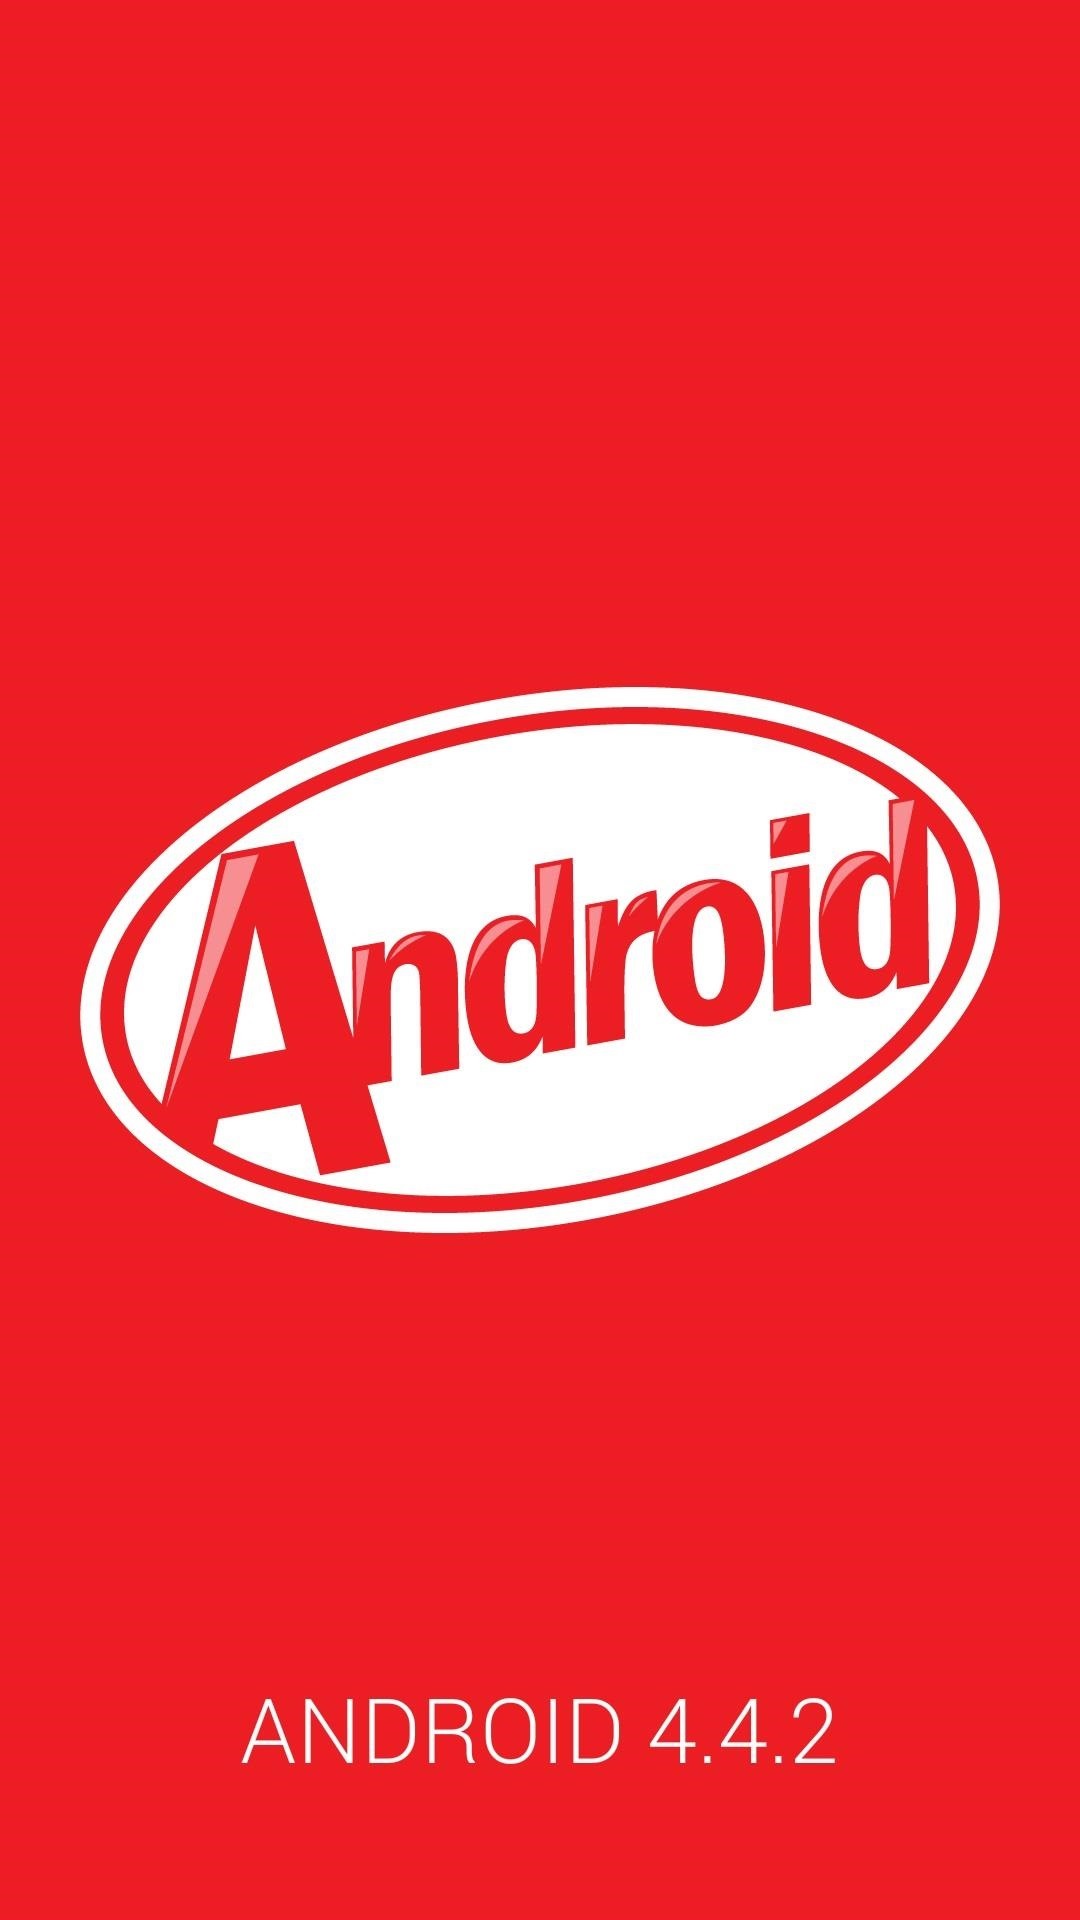 Check Out the Newest Test Build of 4.4.2 KitKat for Your Samsung Galaxy S4